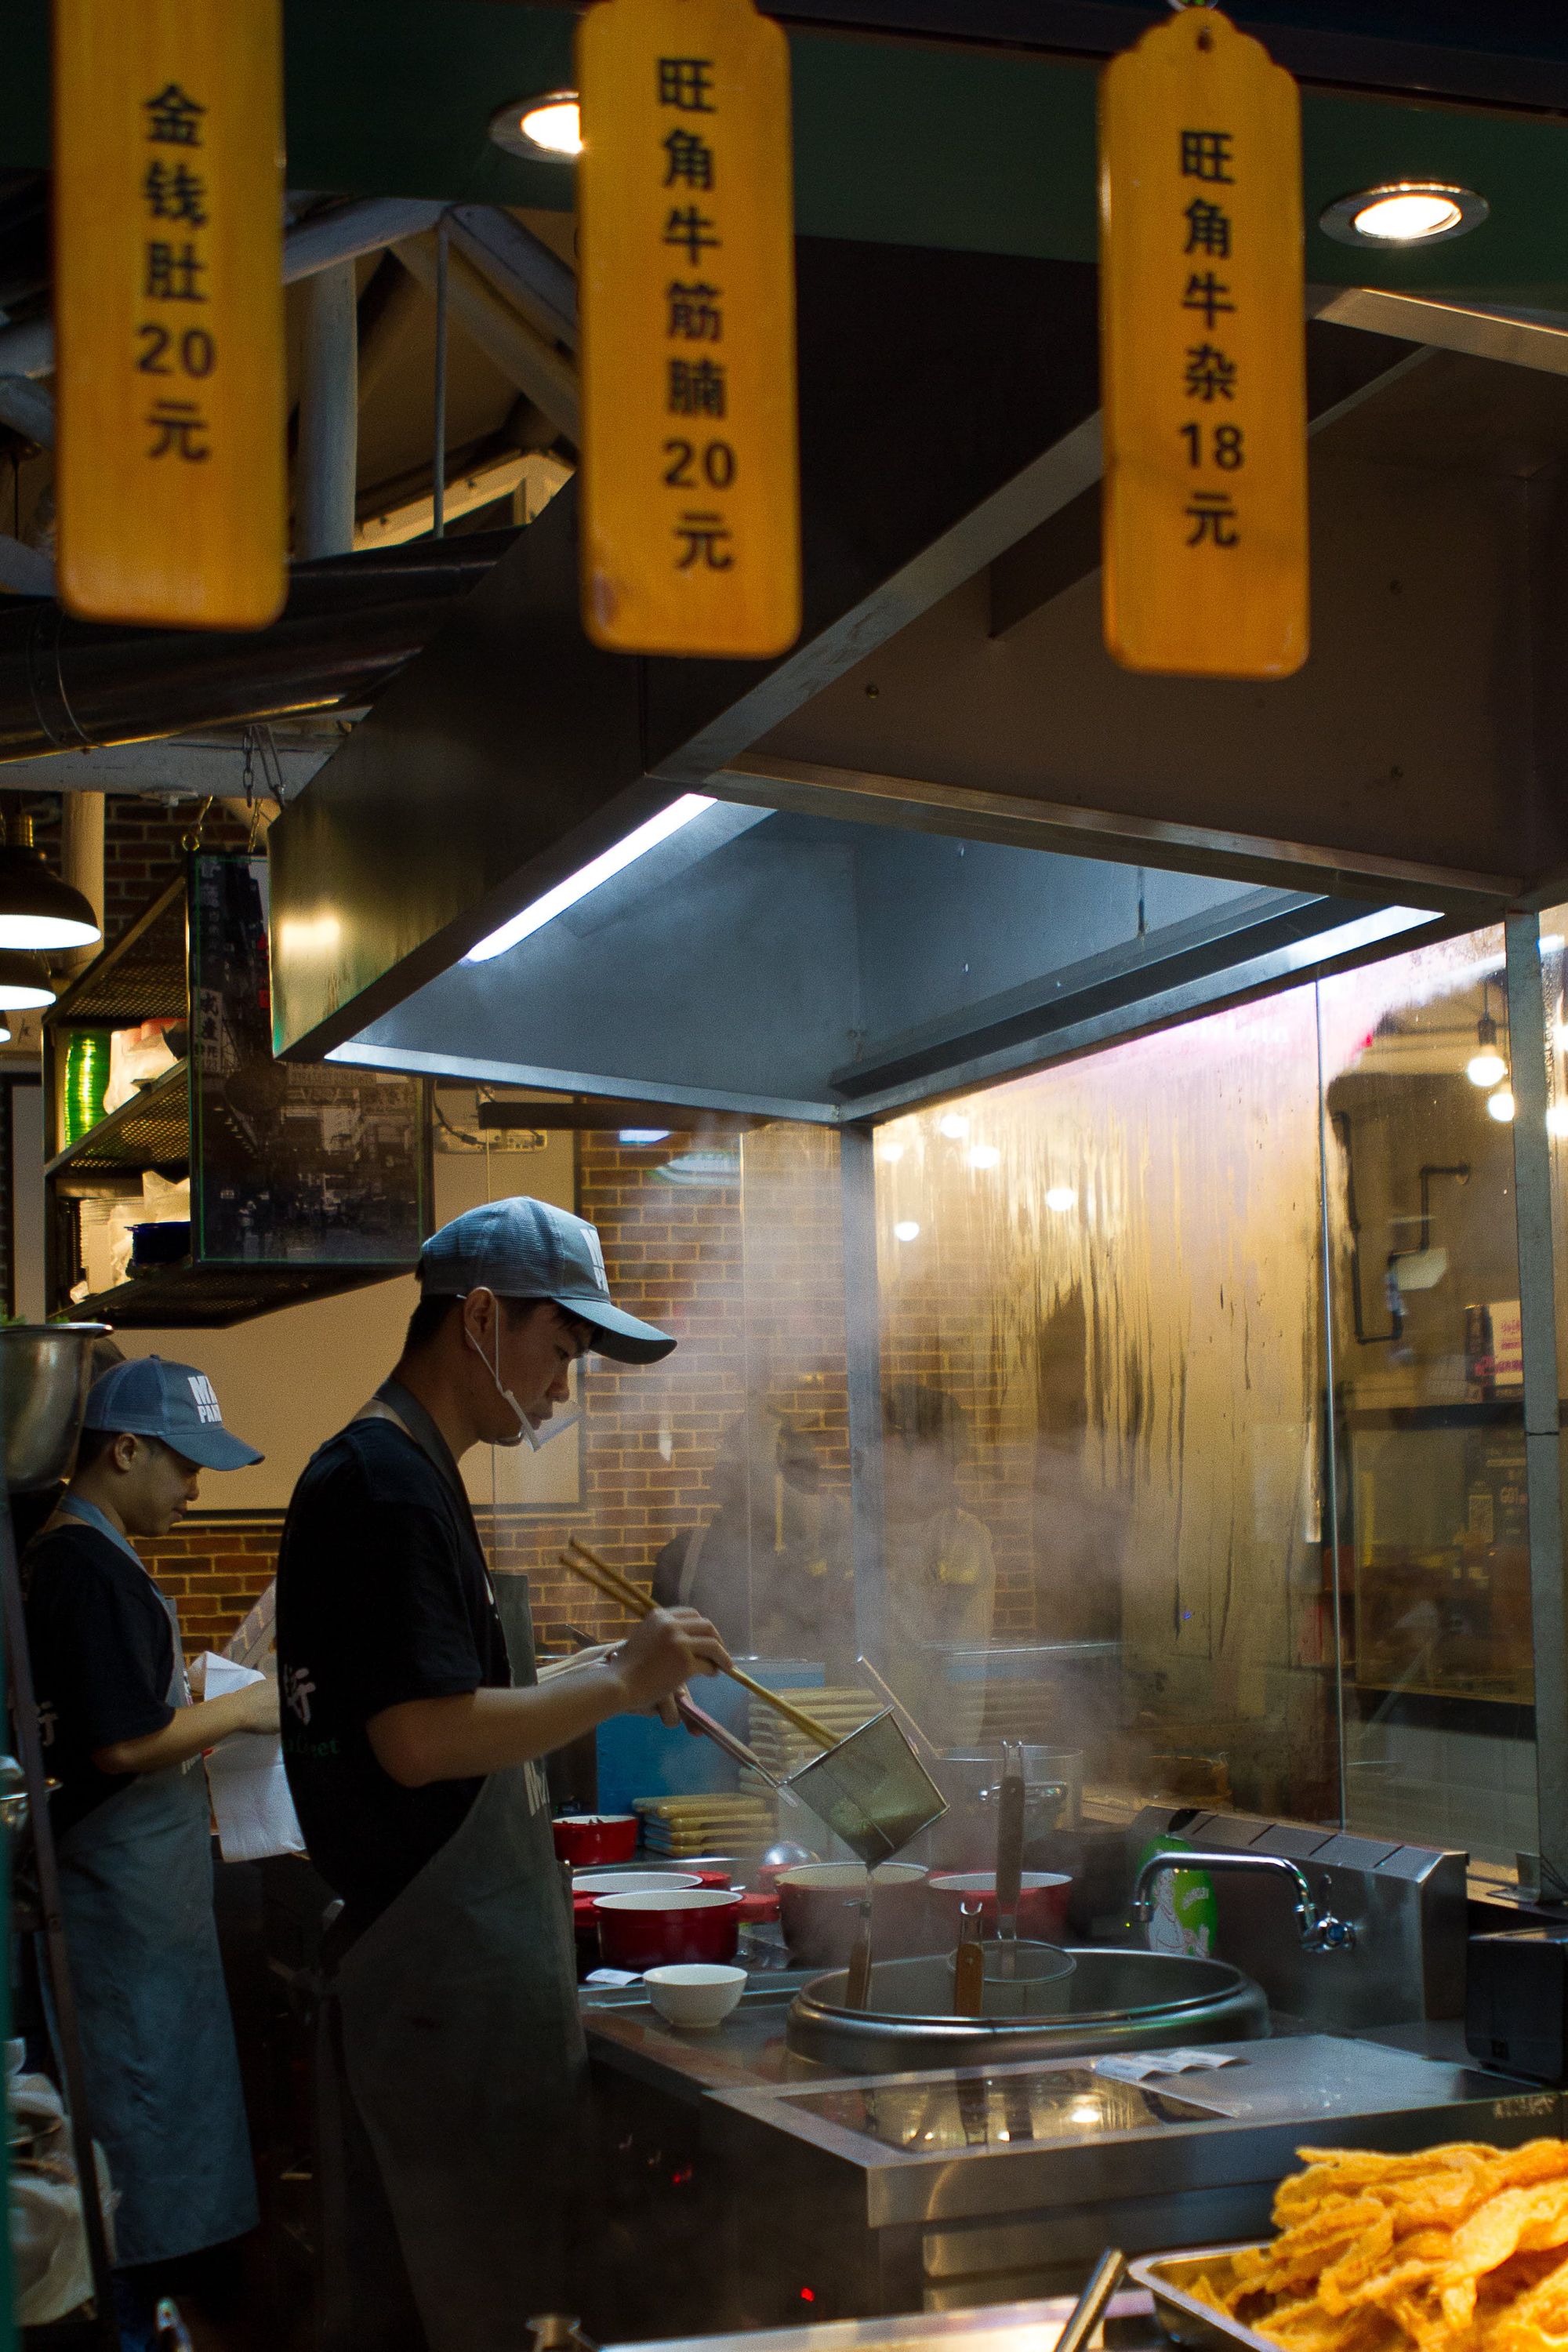 Outdoor Asian food stand with two cooks preparing dishes, utensils on the counter, and visible Chinese dish names with prices